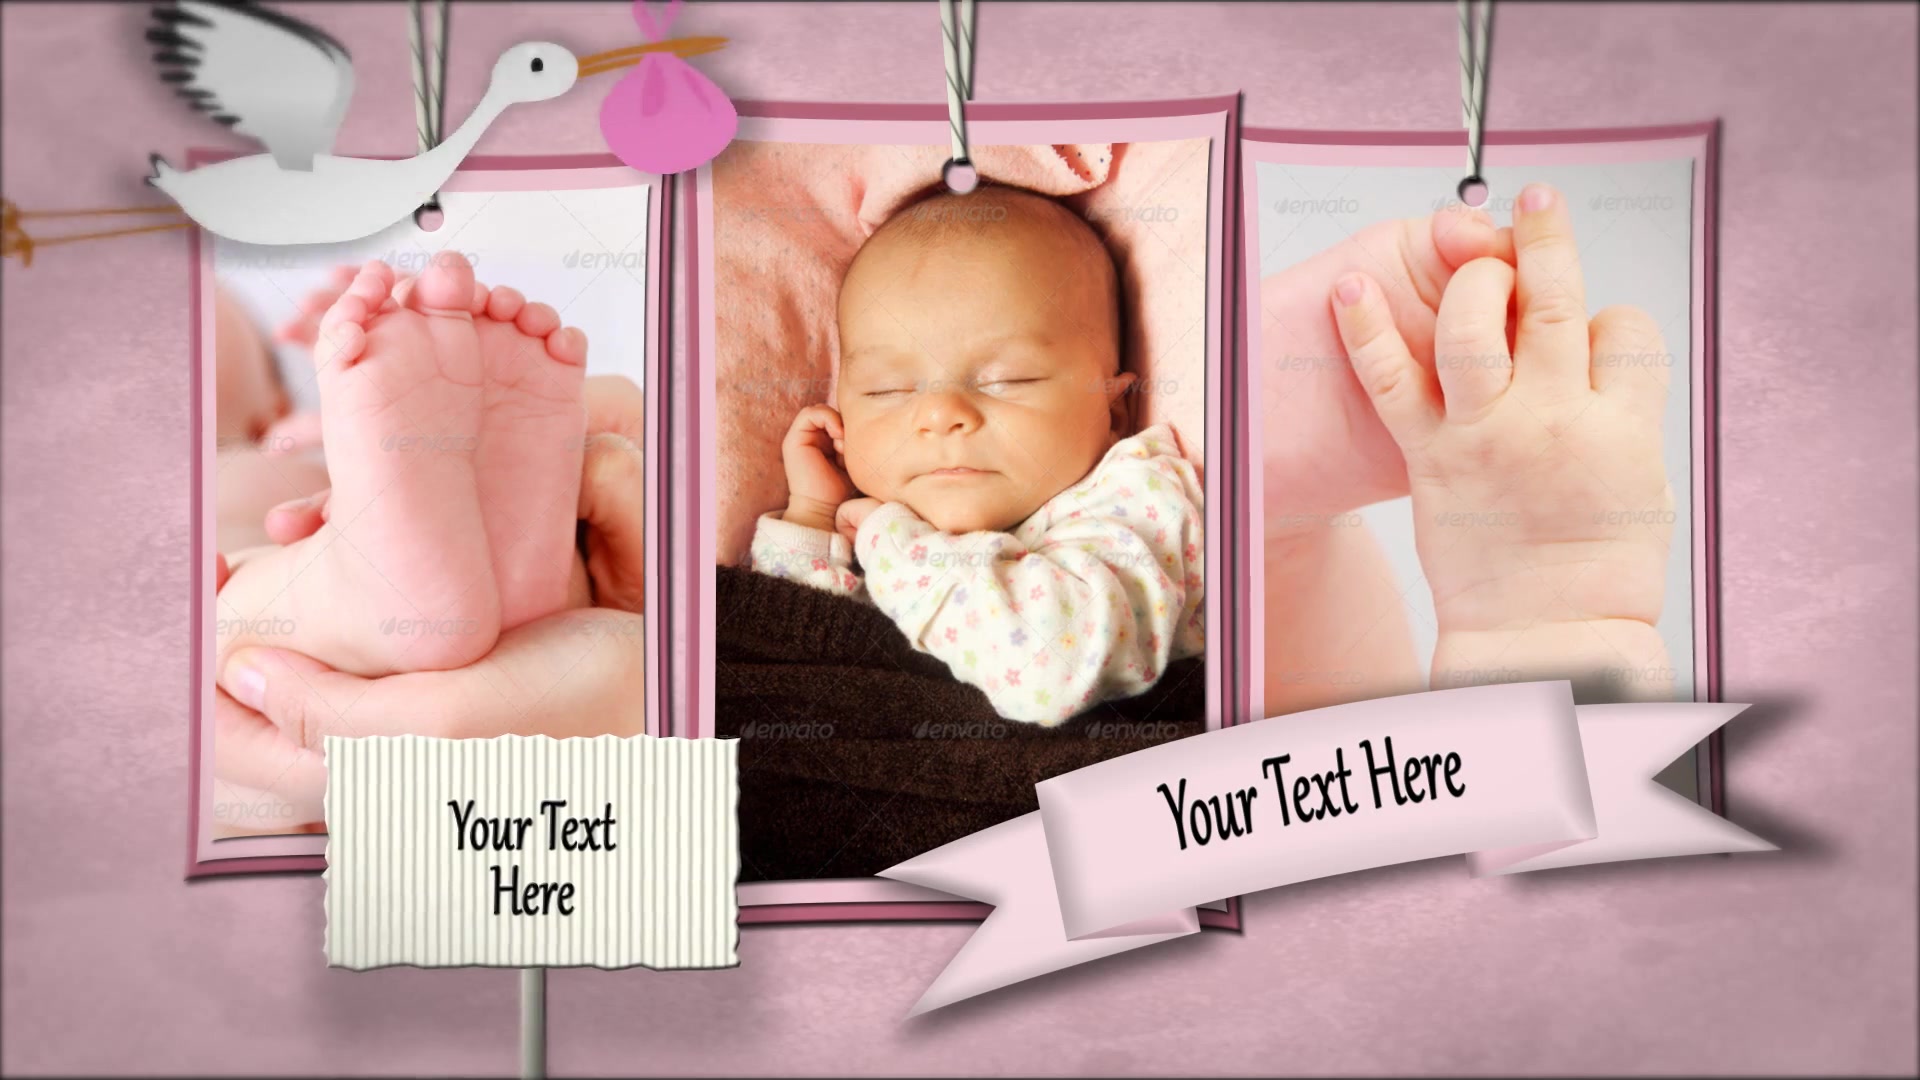 Baby Shadowbox Show - Download Videohive 7758924